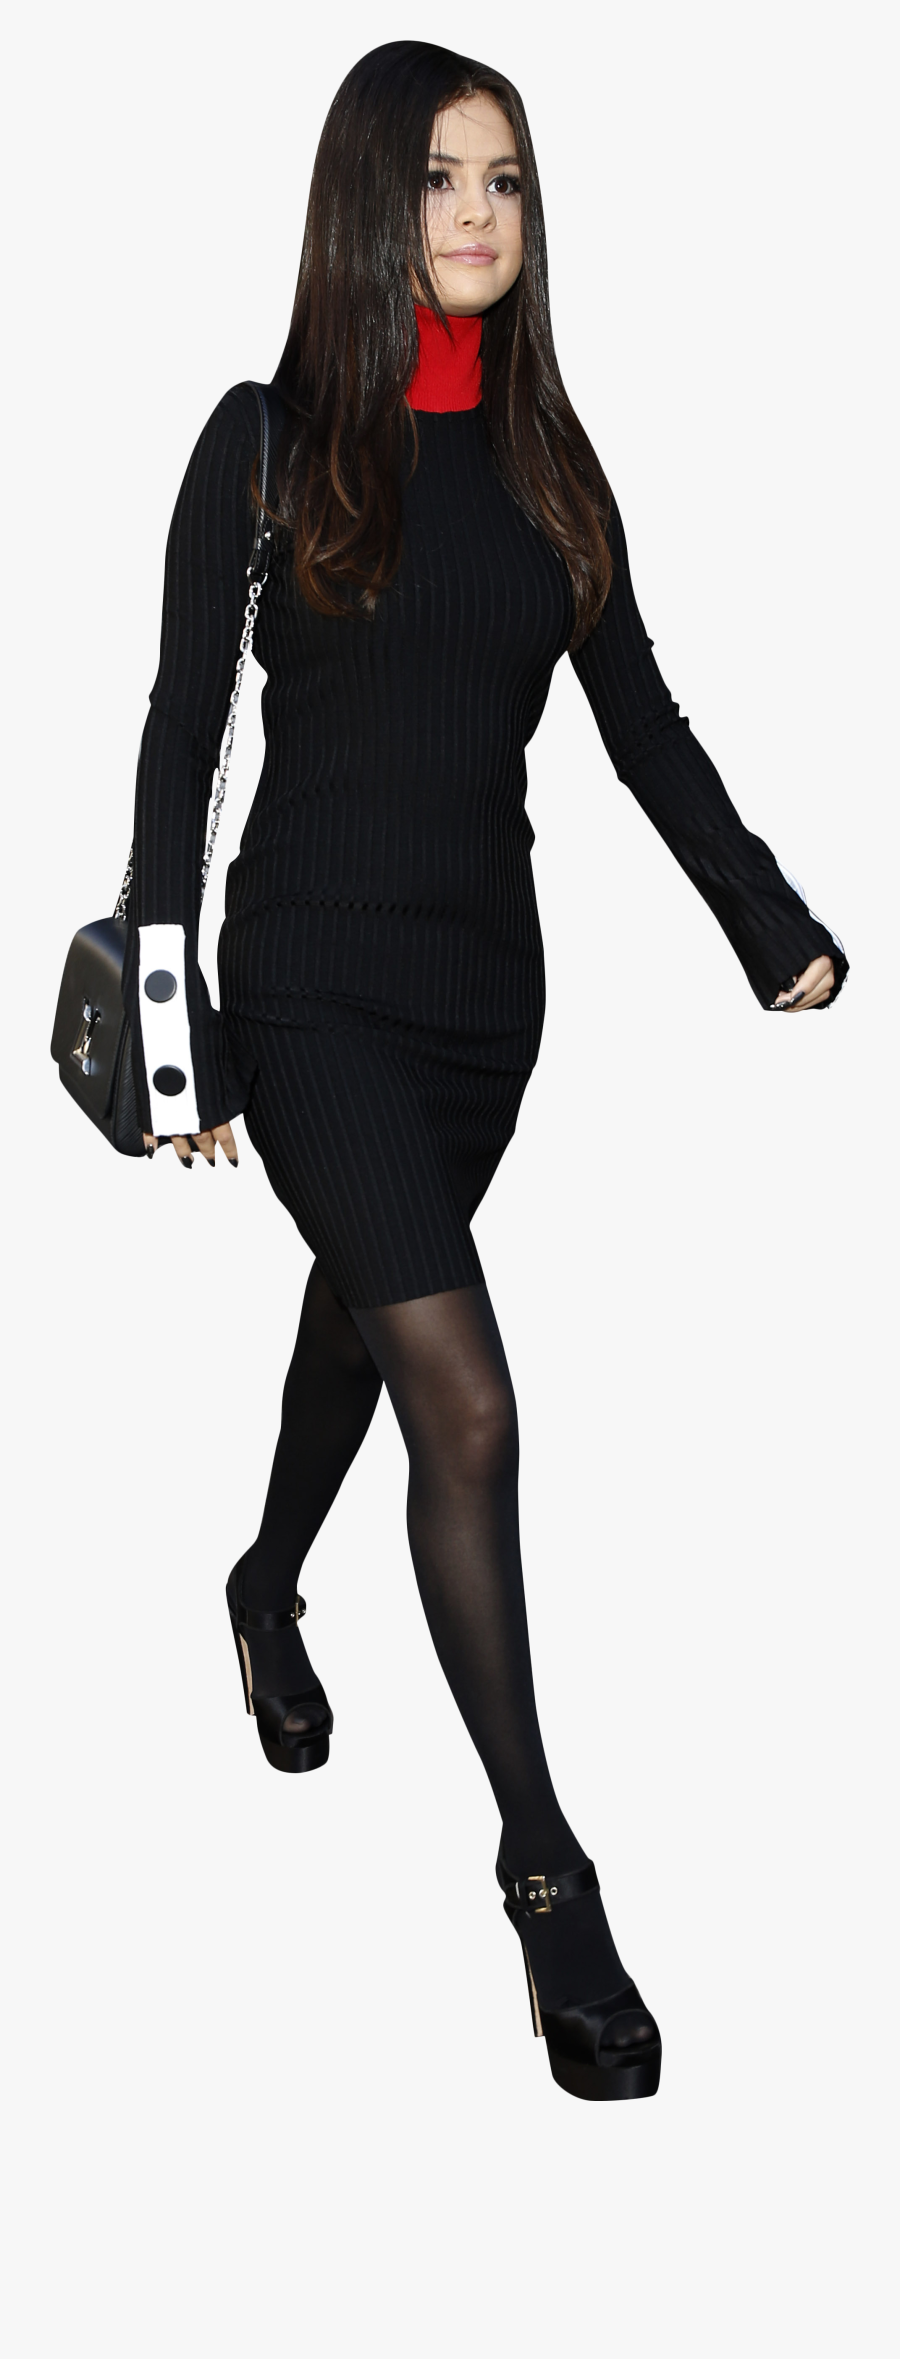 Selena Gomez Walking In Black Png Image - Tights, Transparent Clipart